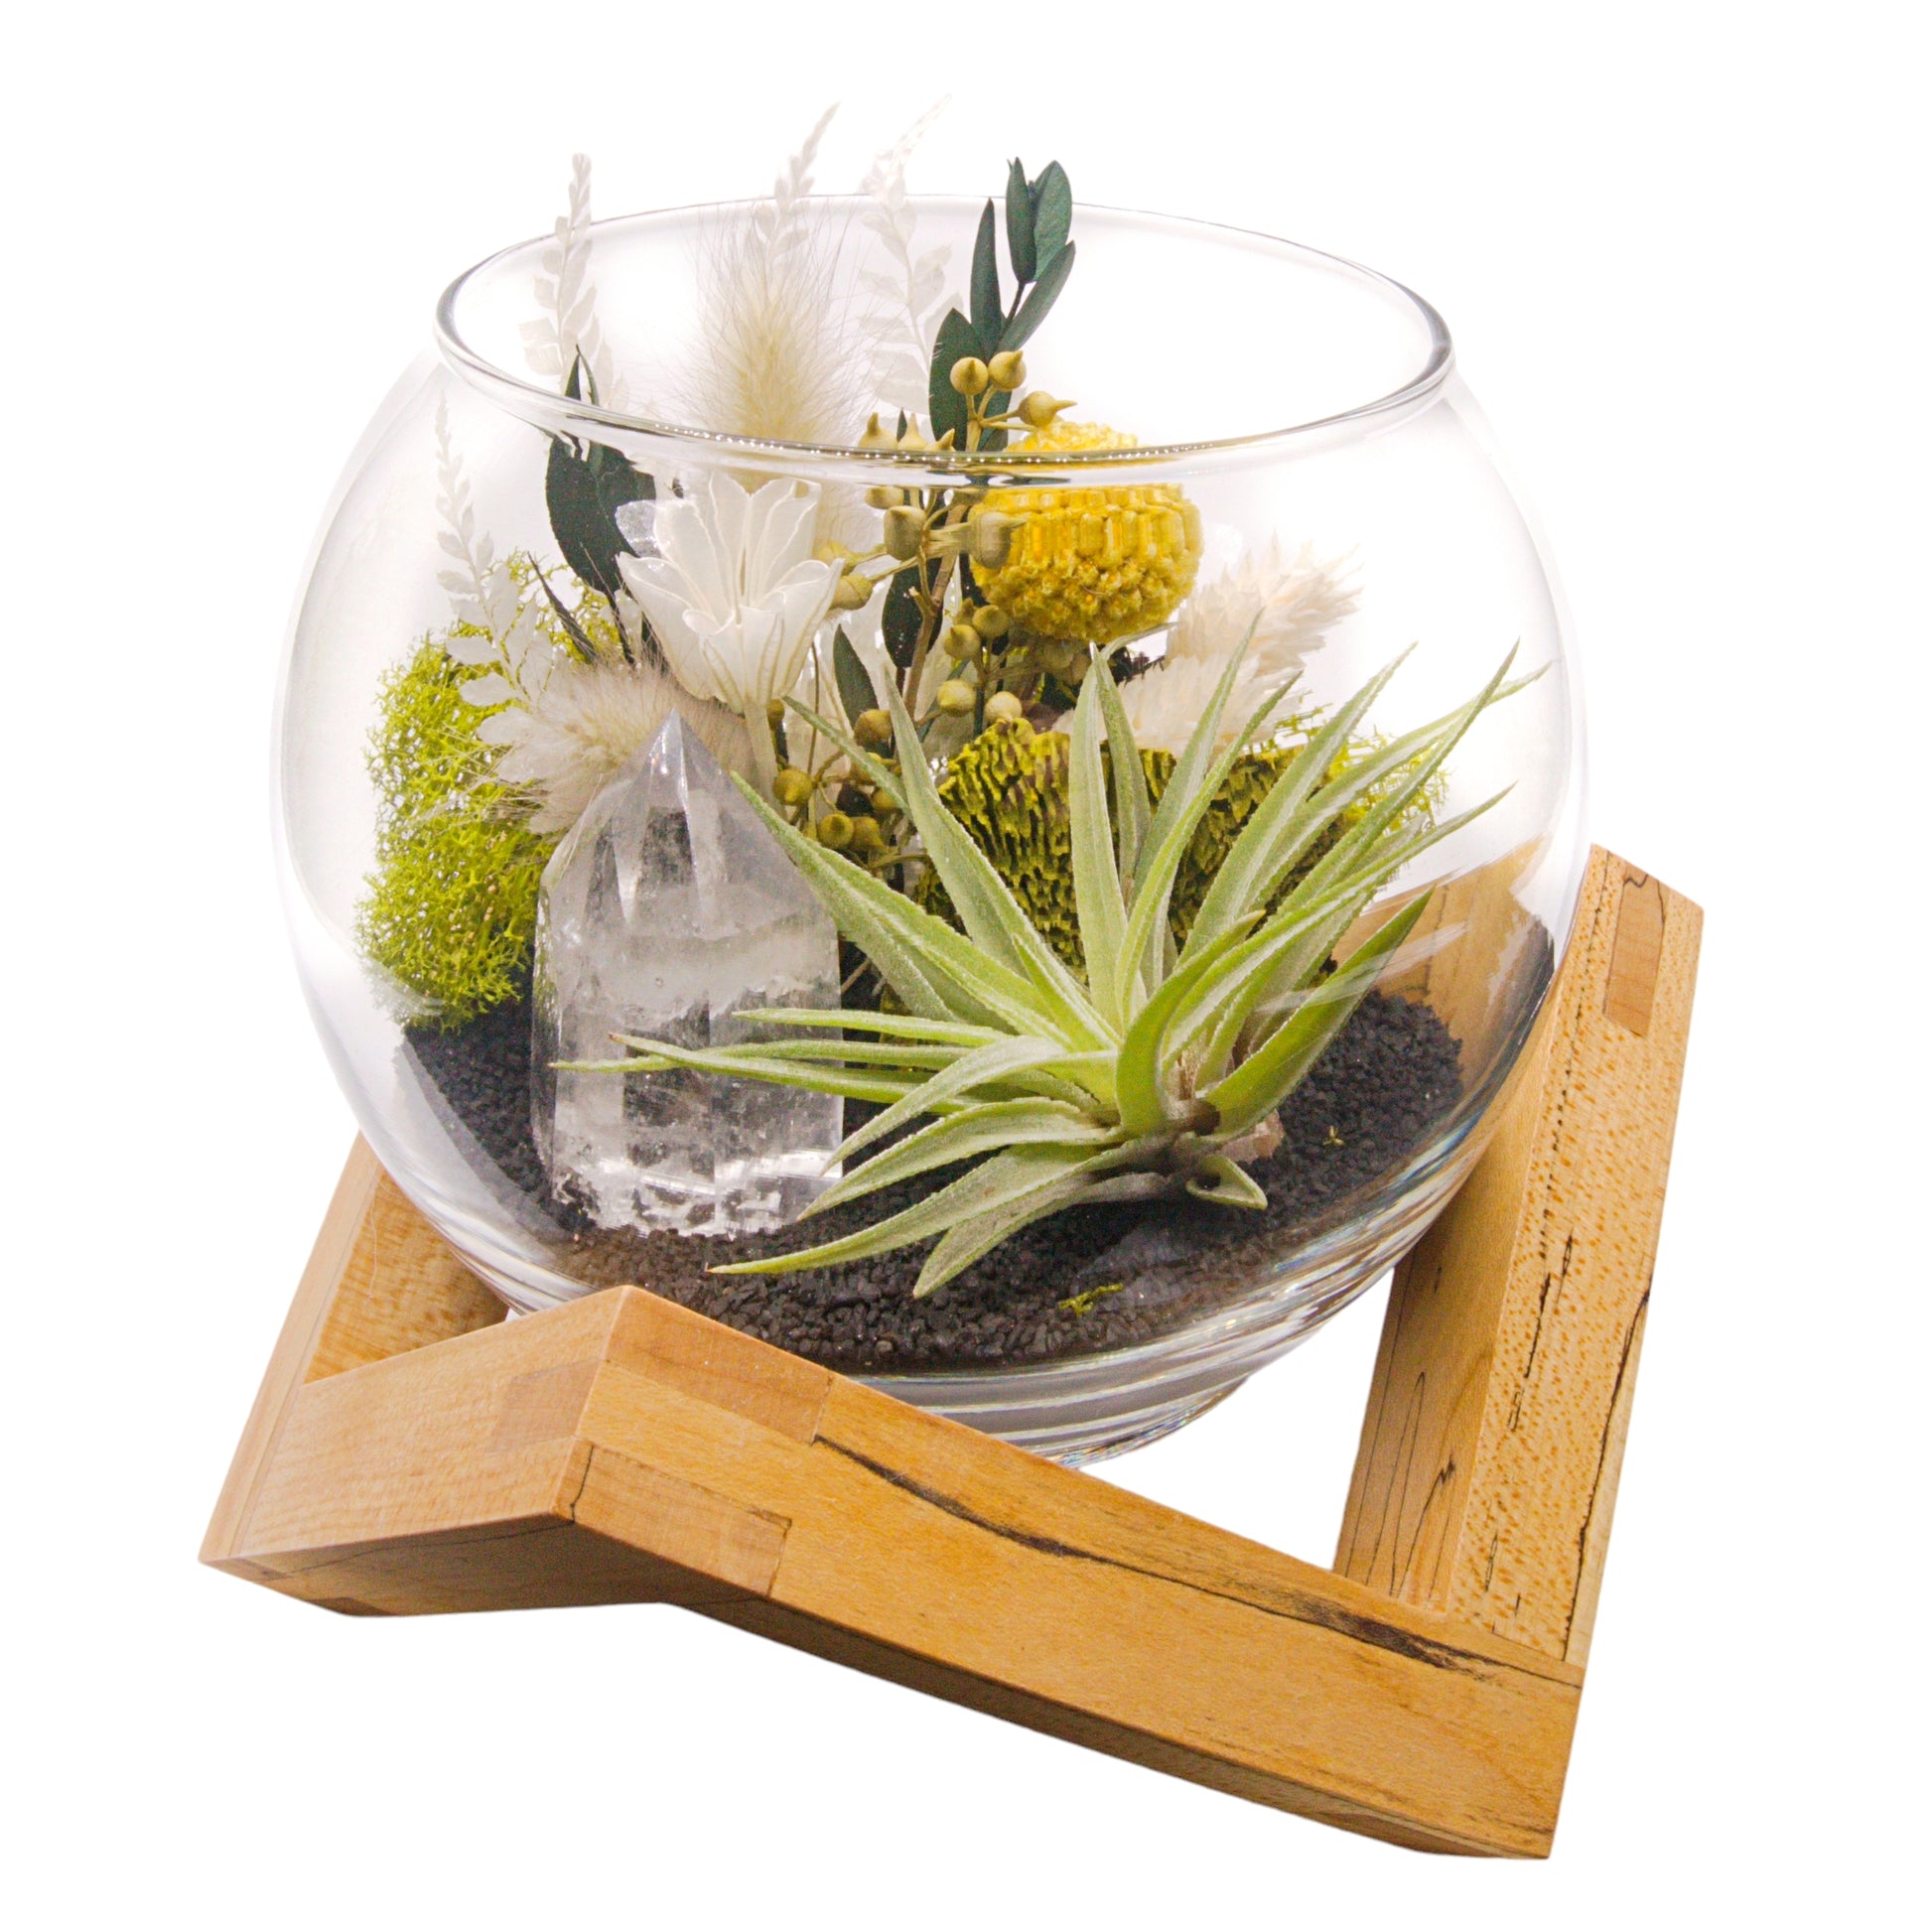 A glass bowl airplant terrarium with black sand, a bouquet of dried flowers, green moss, a dried mushroom and a crystal quartz tower.